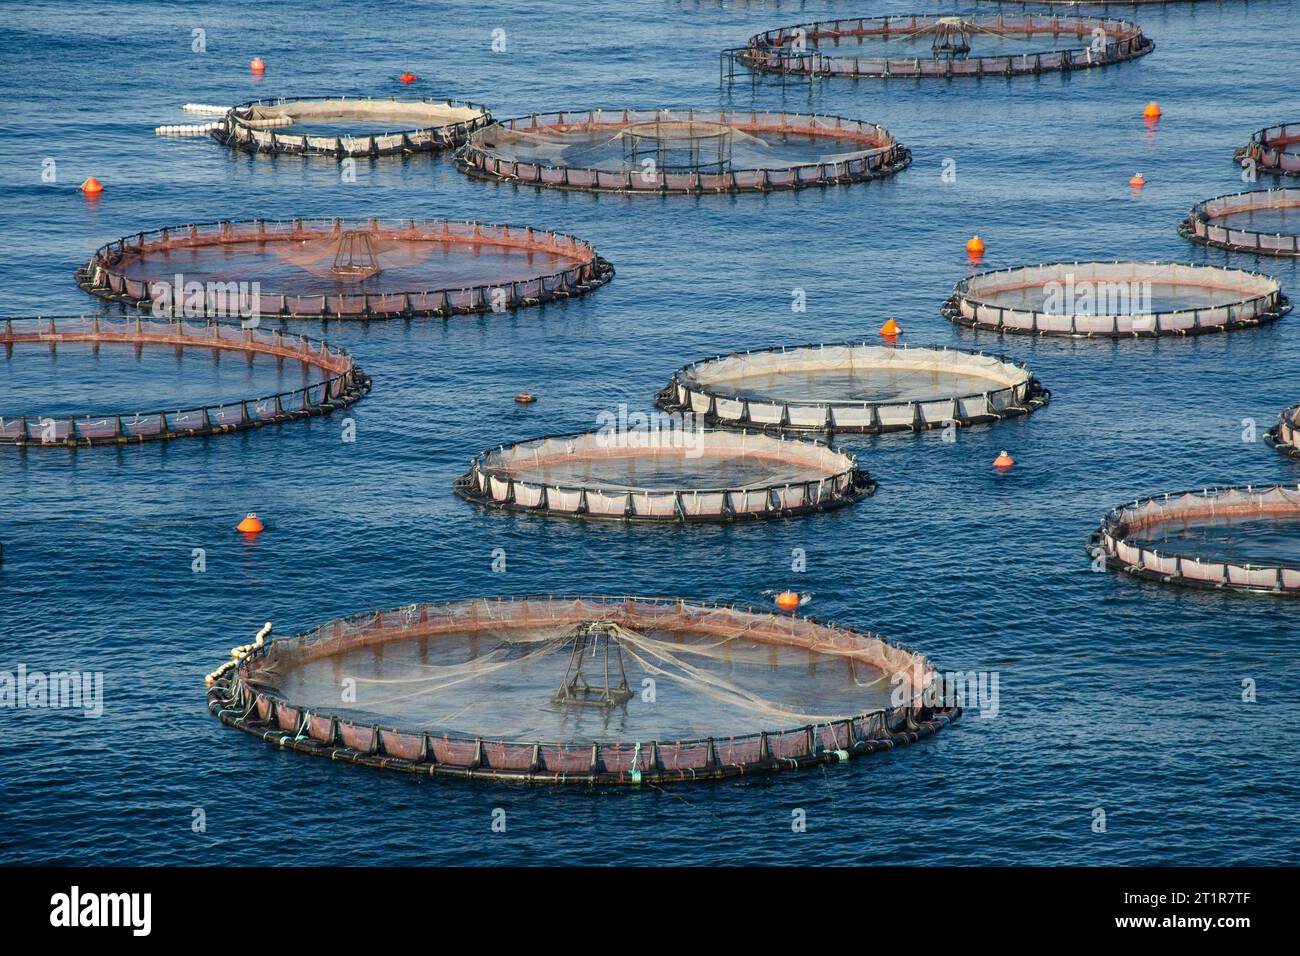 Cages for growing fish. Floating construction for open-water fish